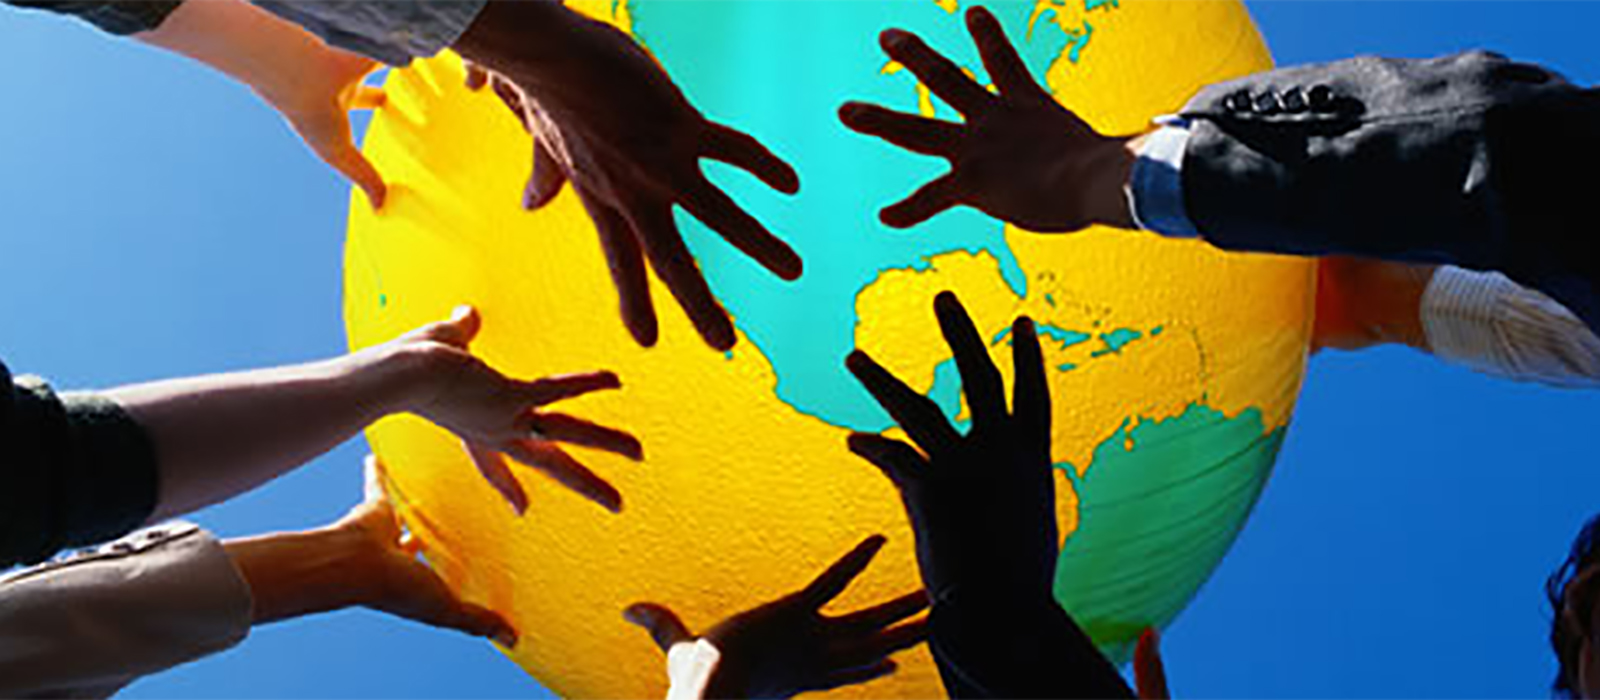 Several sets of hands holding up a globe